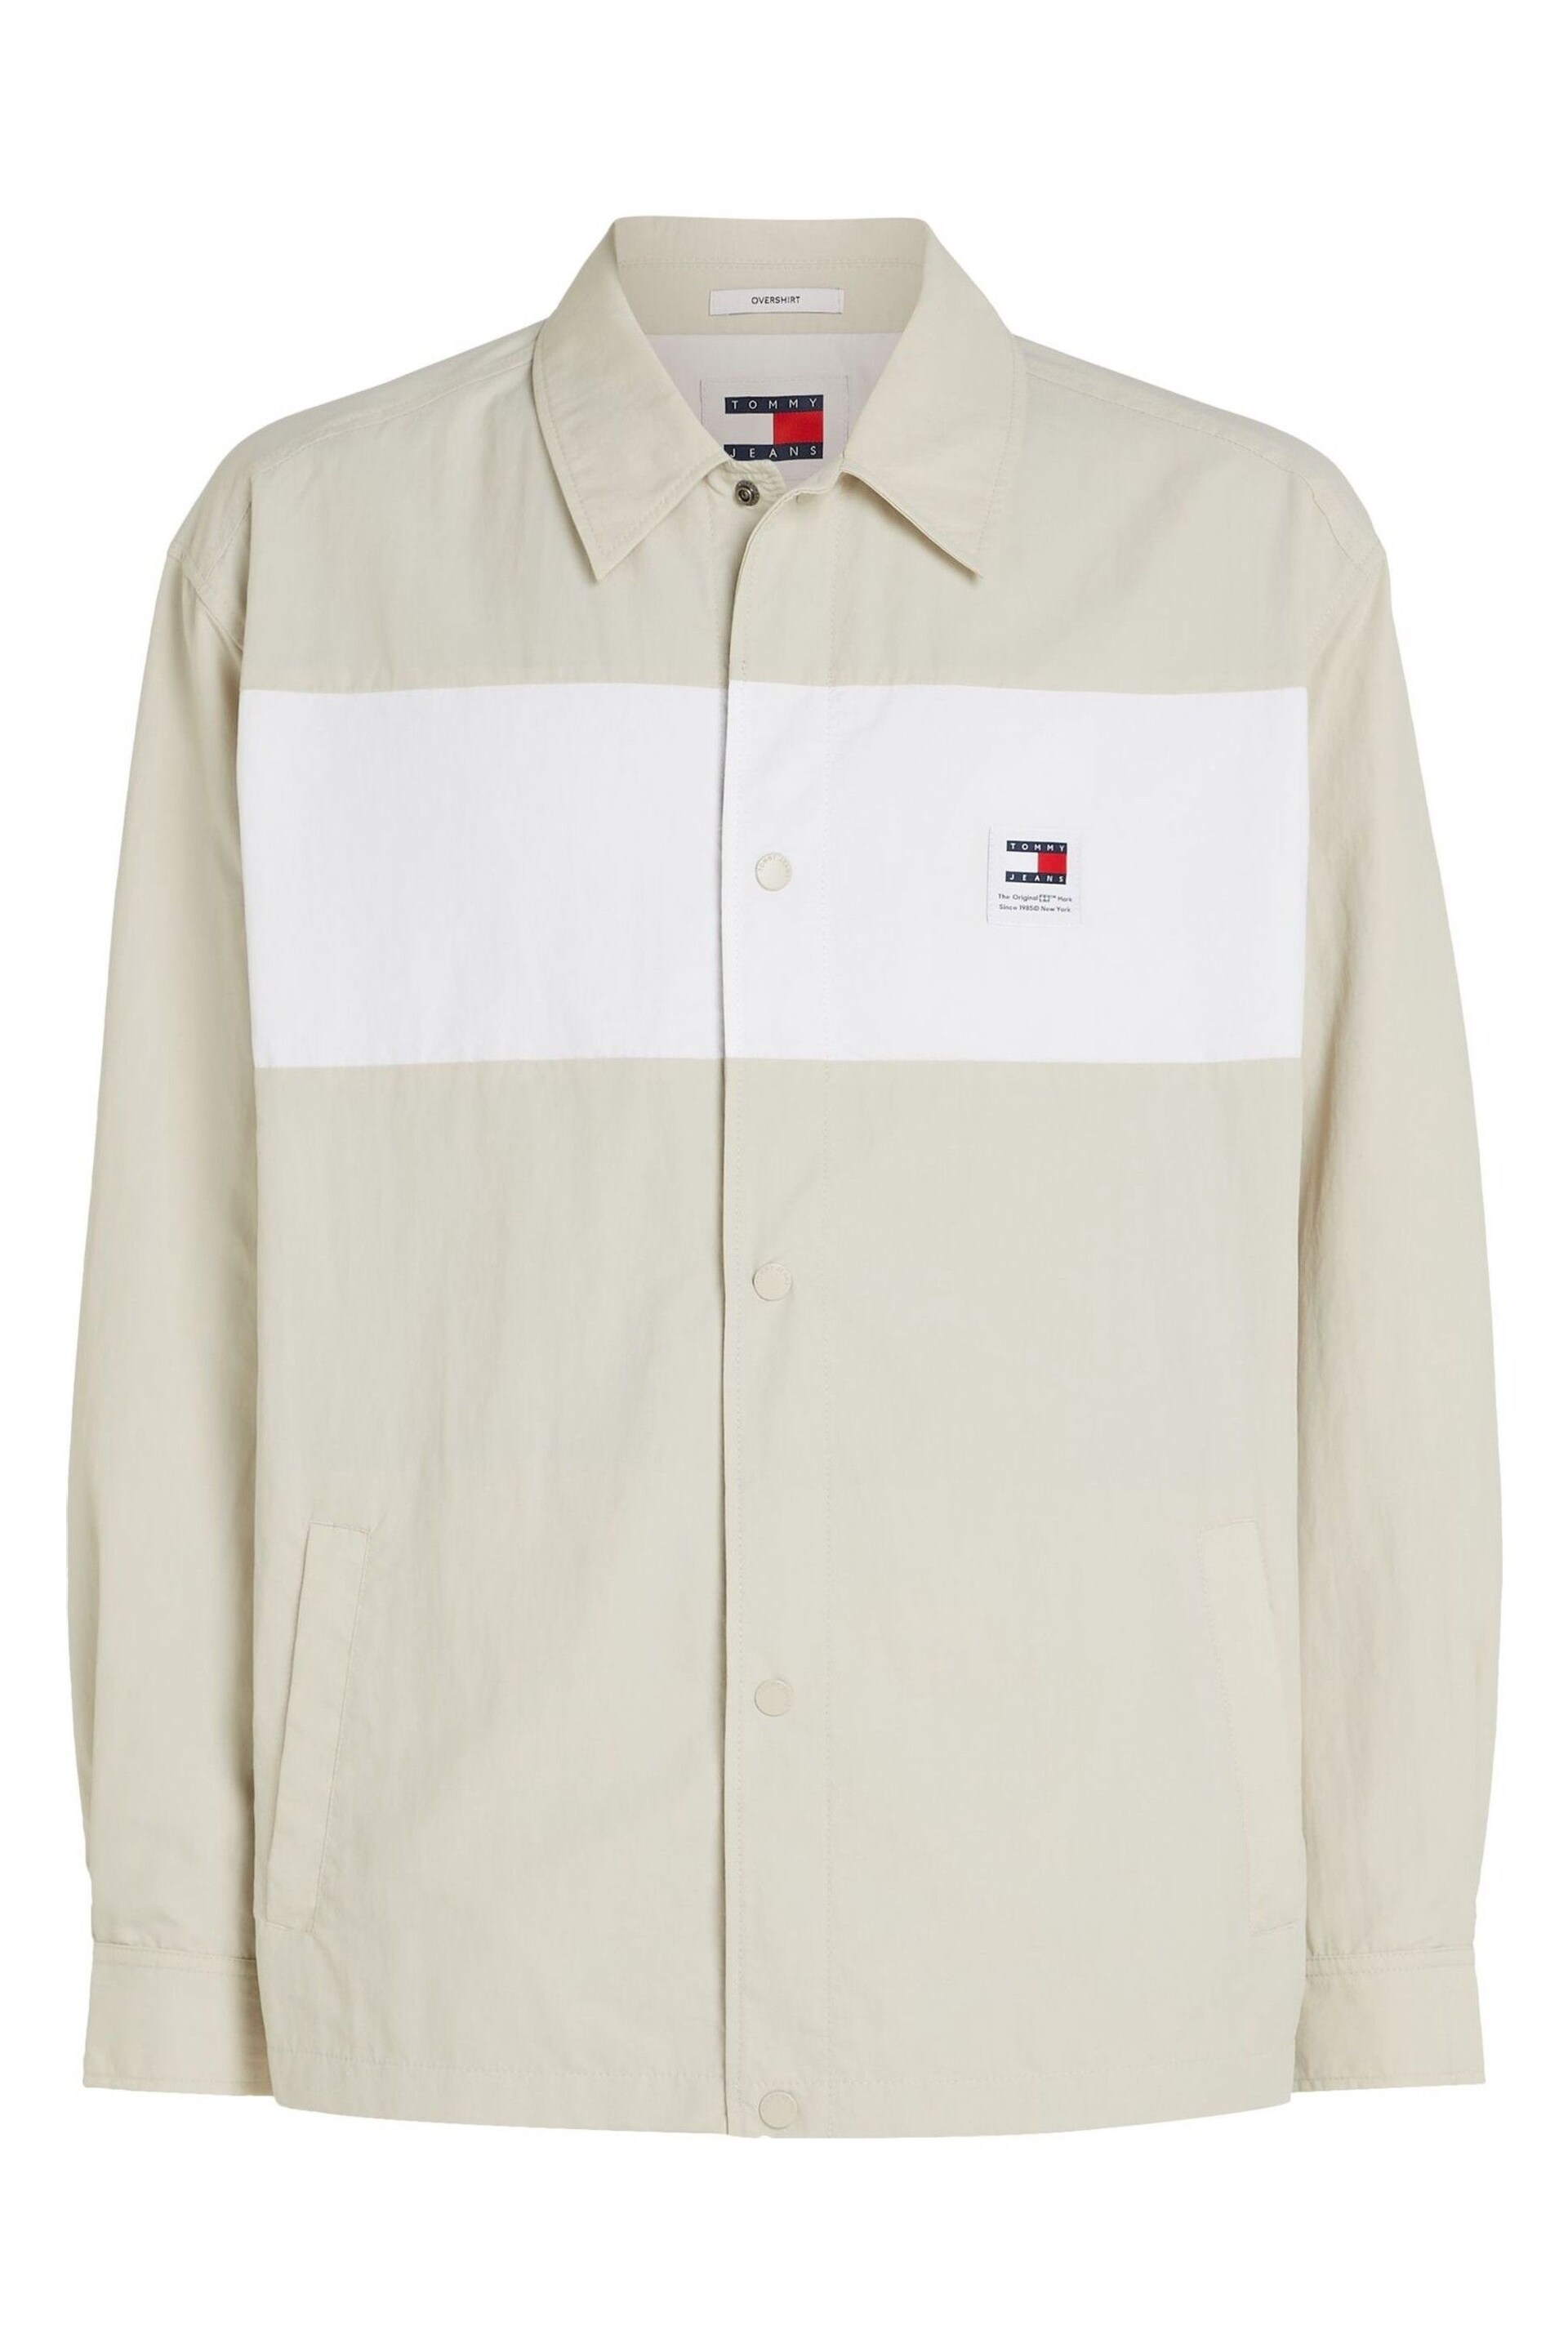 Tommy Jeans Cream/White Colourblock Shirt - Image 4 of 6